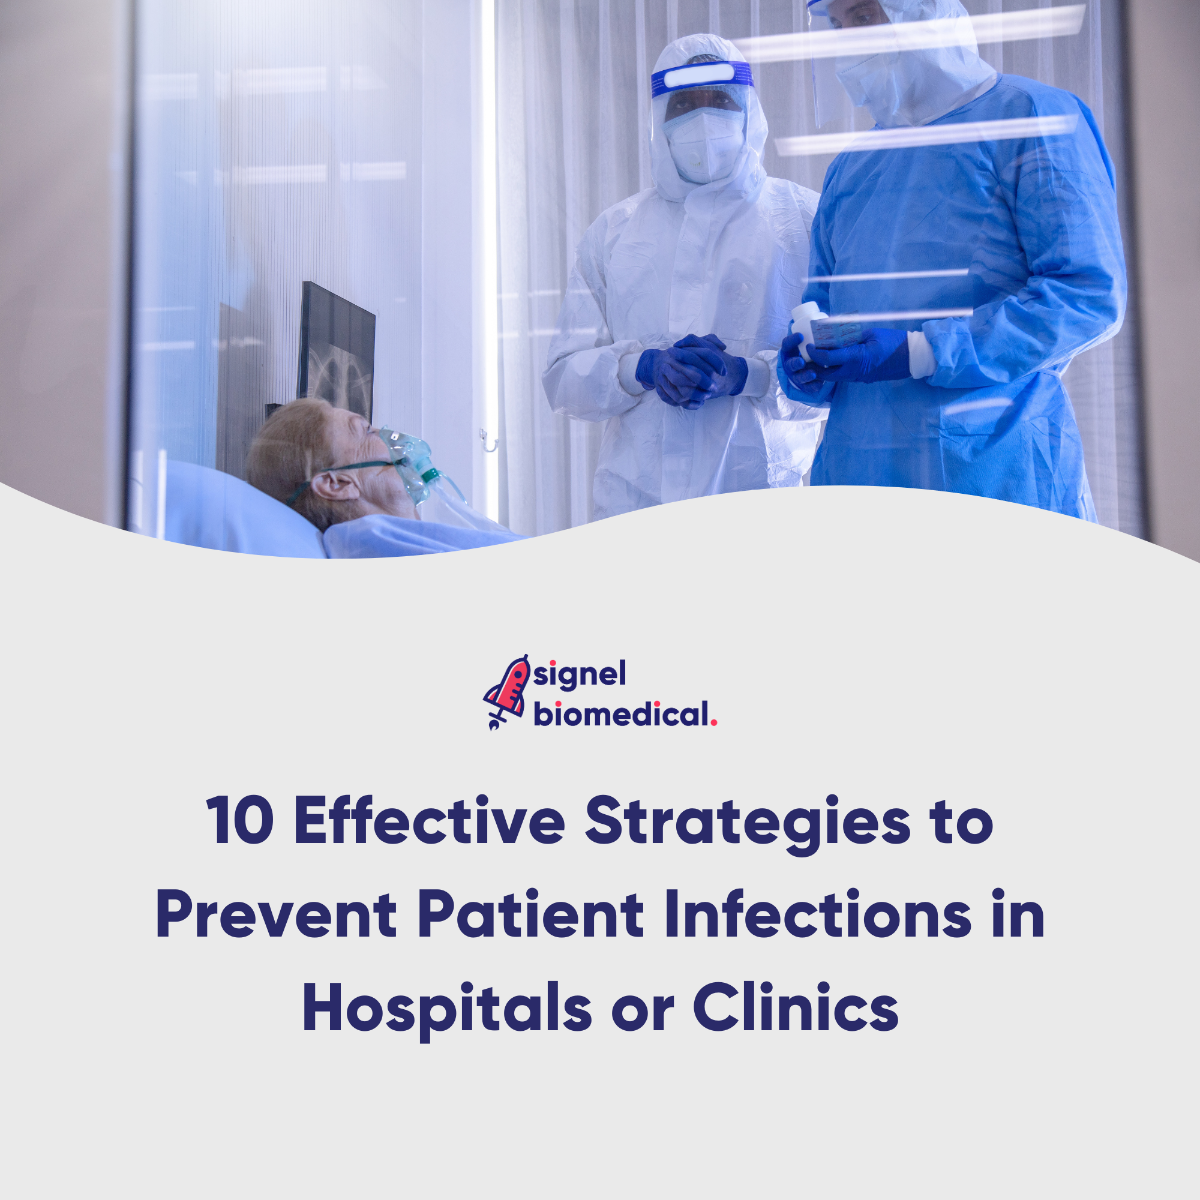 10 Effective Strategies to Prevent Patient Infections in Hospitals or Clinics